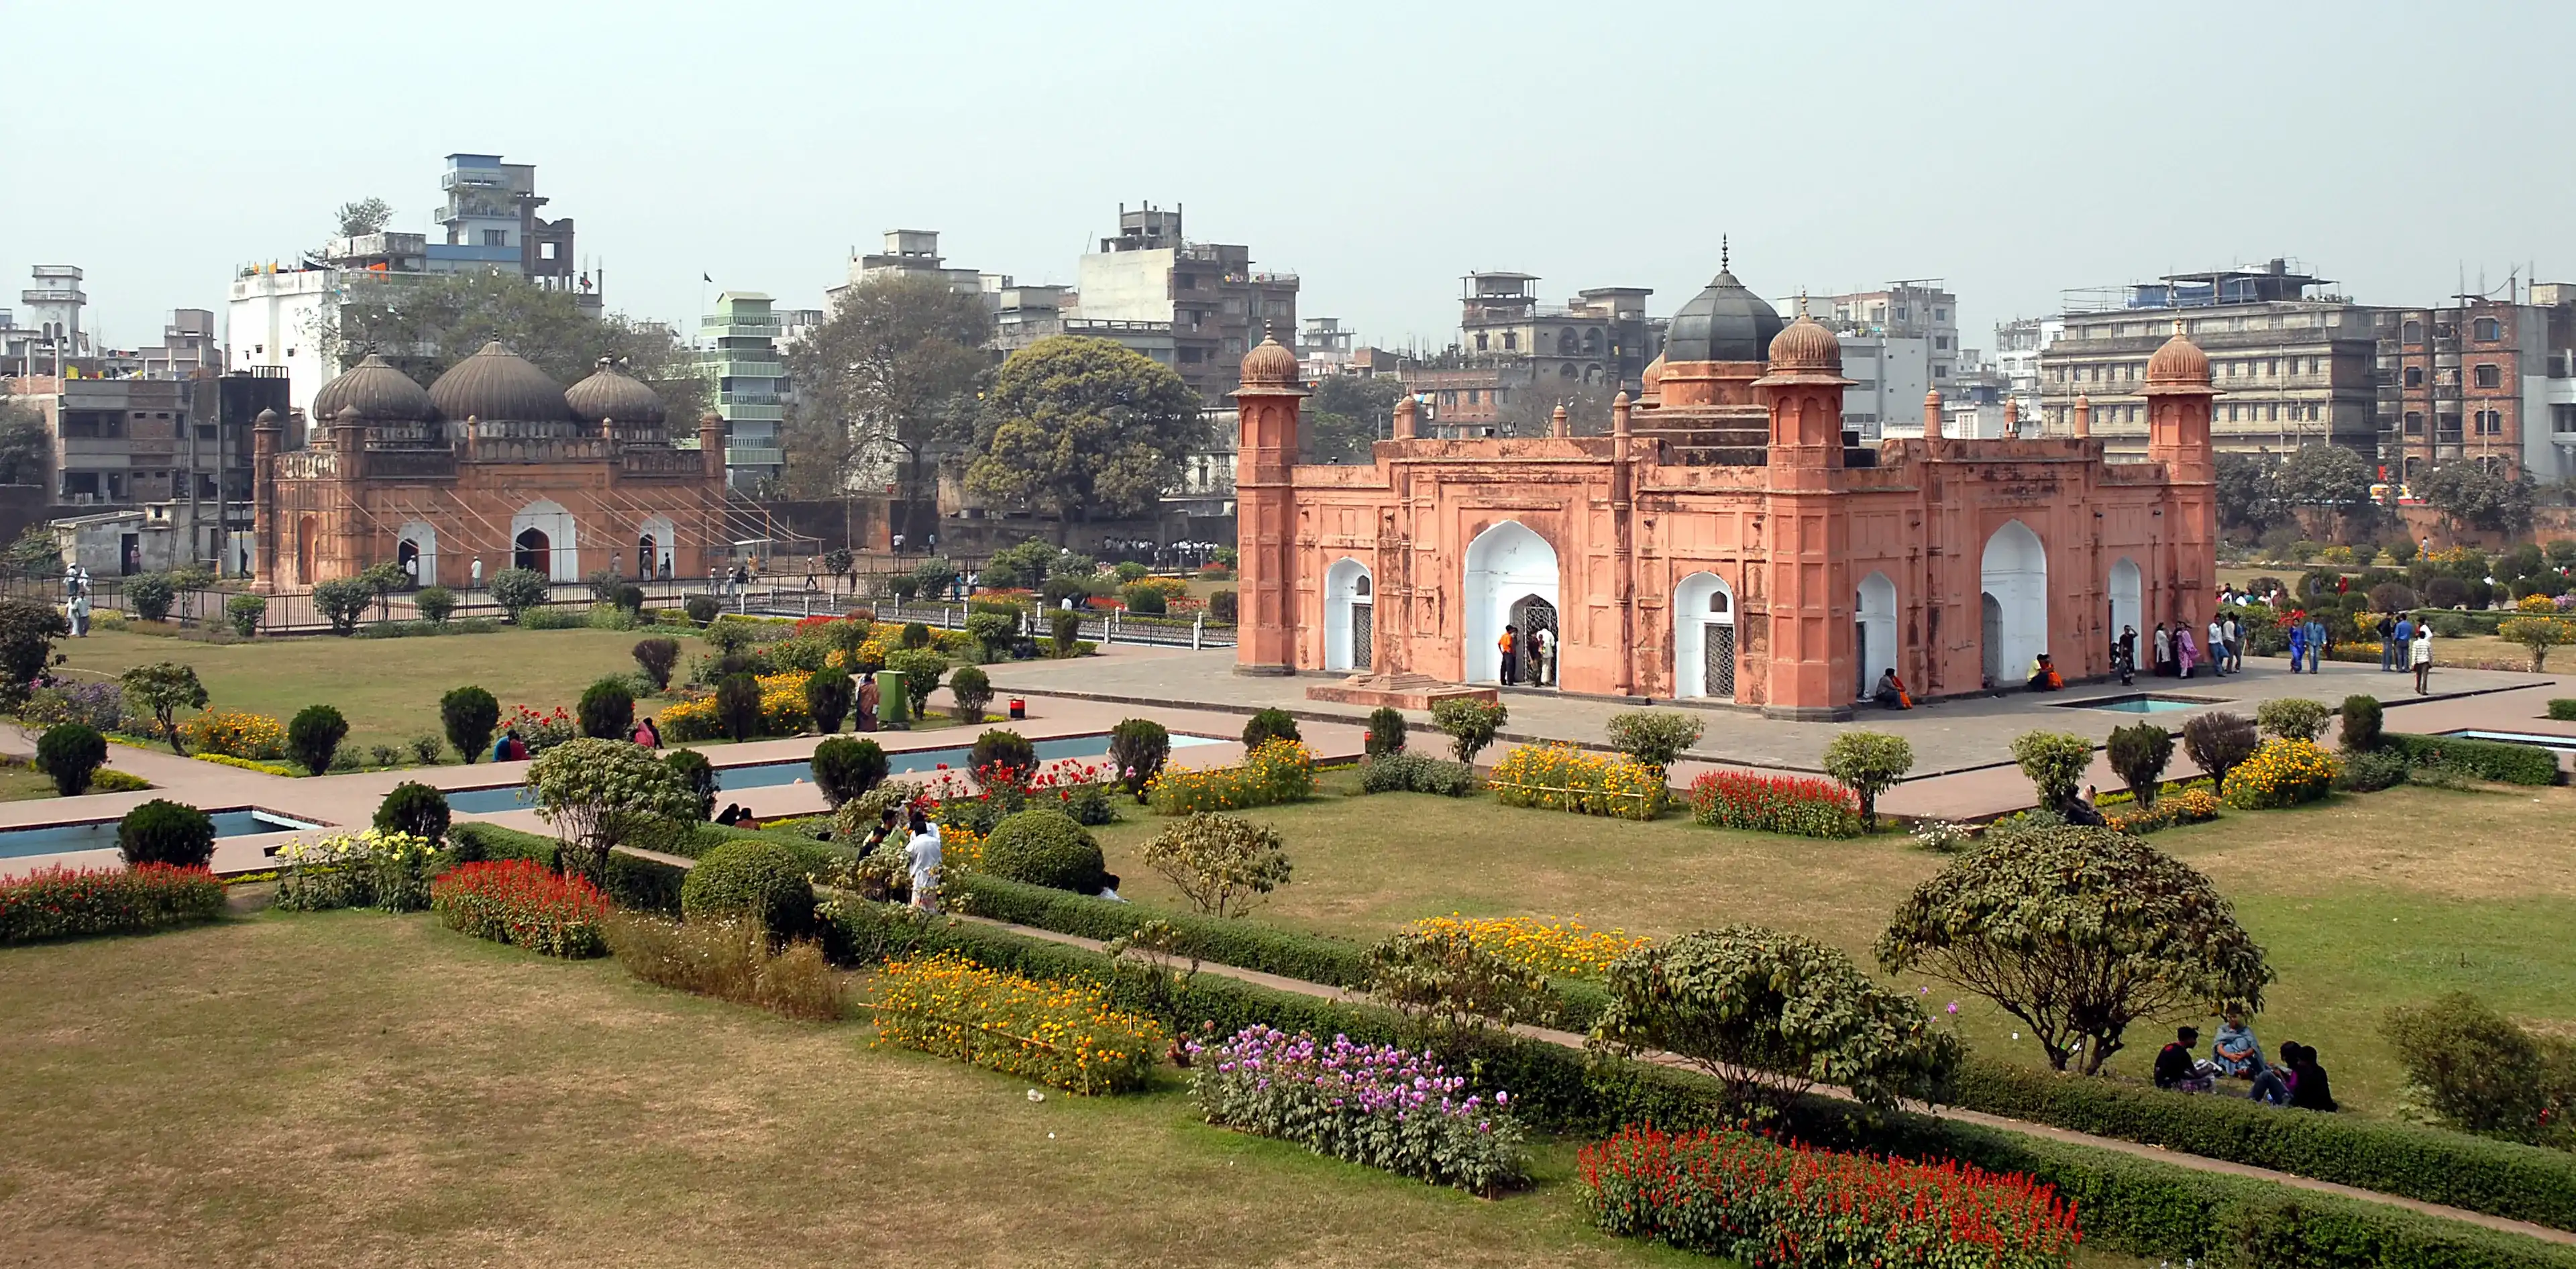 Lalbagh Fort in Dhaka, Bangladesh. This is the tomb of Bibi Pari in the grounds of Lalbagh Fort, Dhaka. To the left with three domes is Lalbagh Fort Mosque. Tourist sight in Dhaka, Bangladesh.